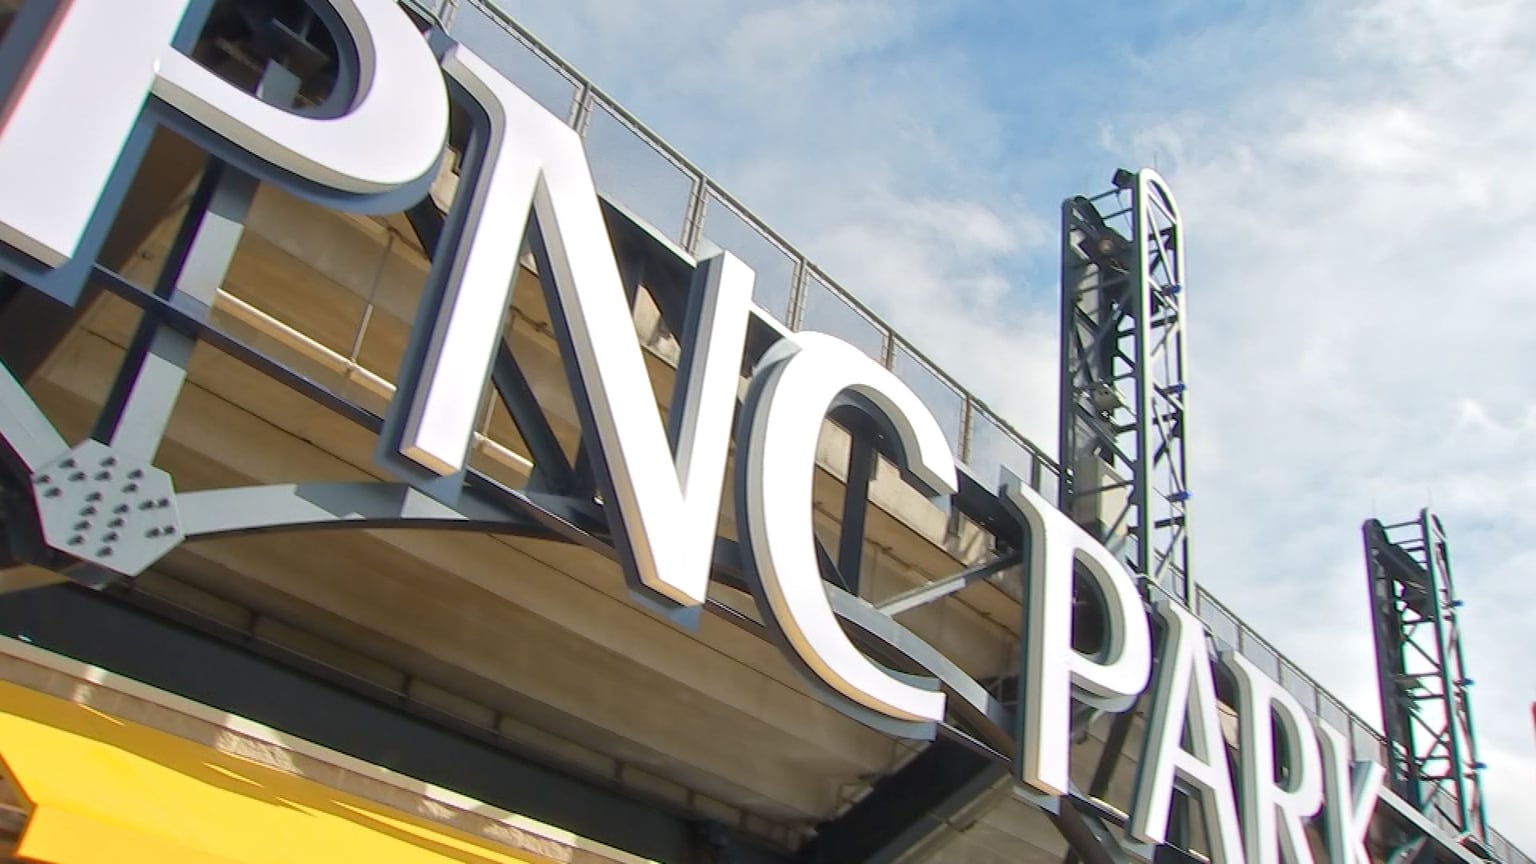 Here's a look at what's new at PNC Park for the 2023 season – WPXI